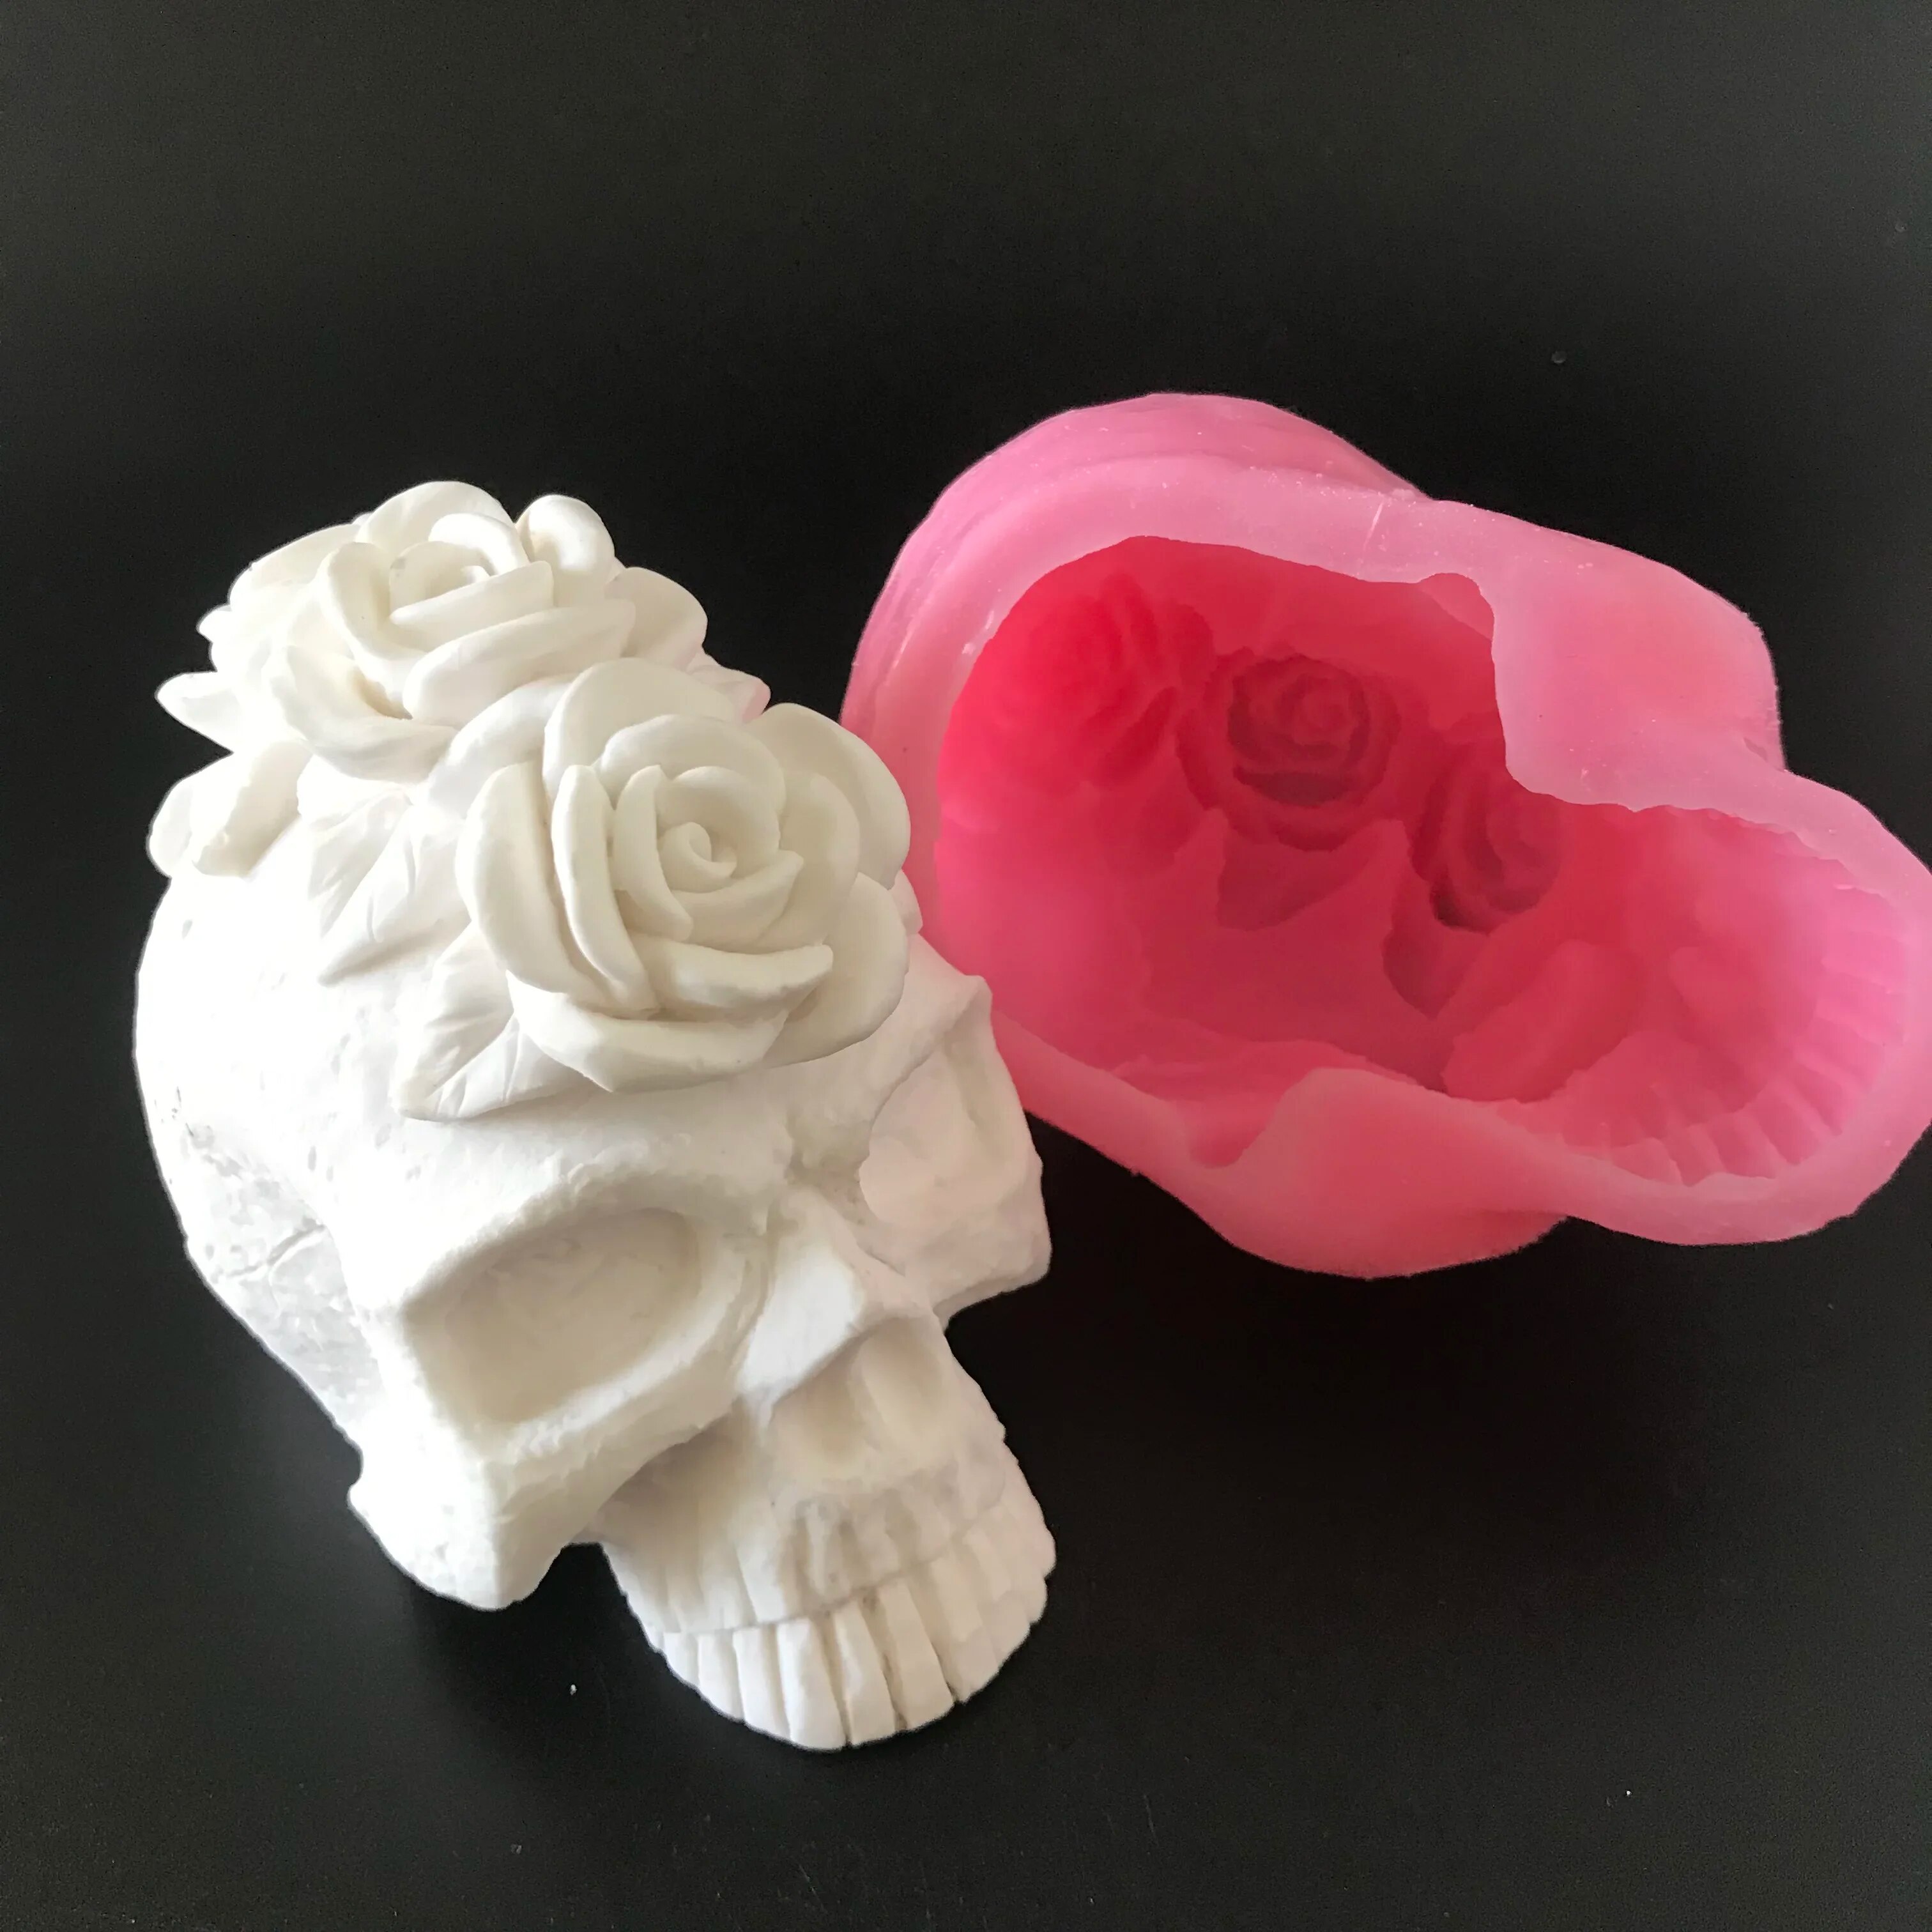 3d Skull Baking Chocolate Mould Handmade Resin Craft Cake Candy Candle Making Chocolate Fondant Silicone Molds